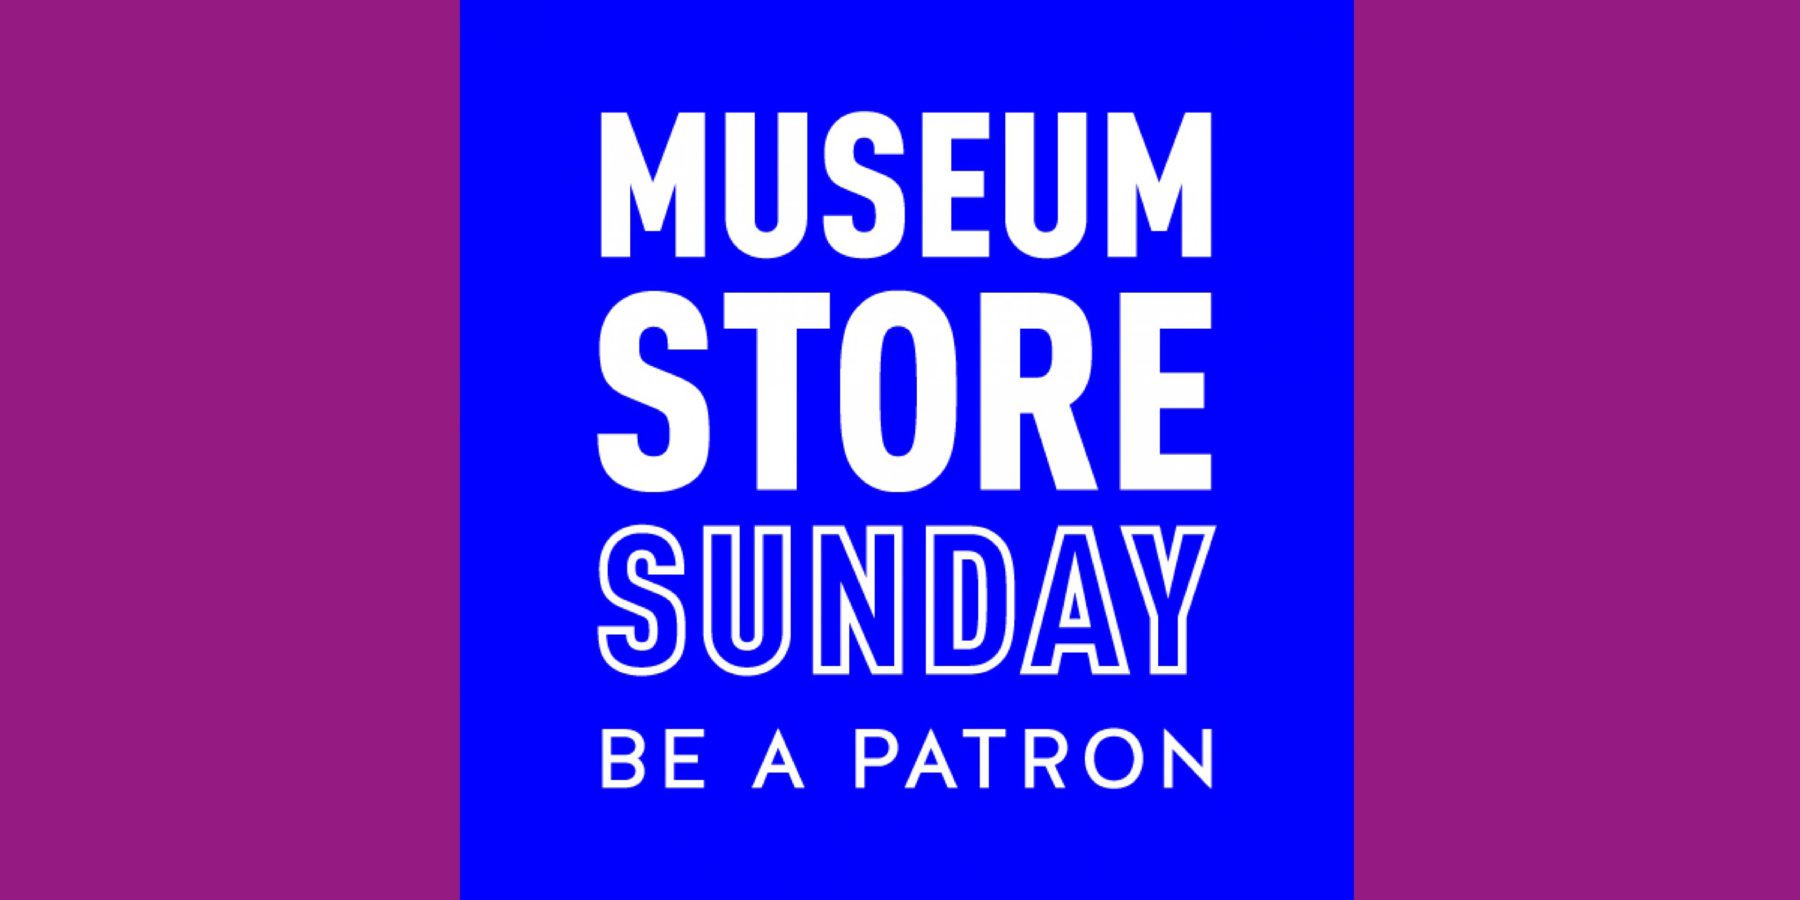 Museum Store Sunday: 25% off the Entire Store!